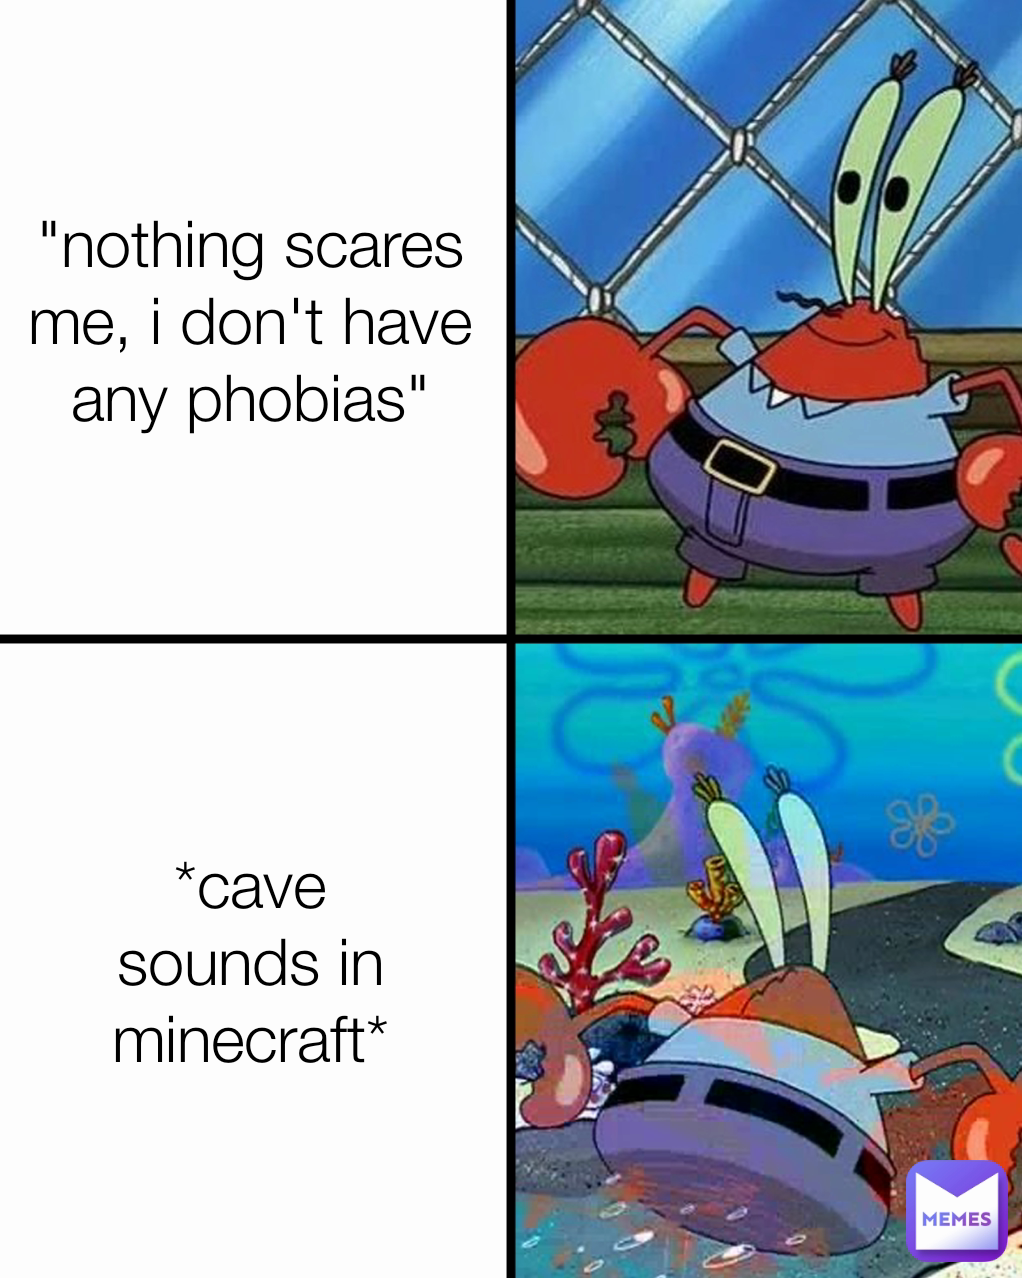 *cave sounds in minecraft* "nothing scares me, i don't have any phobias"